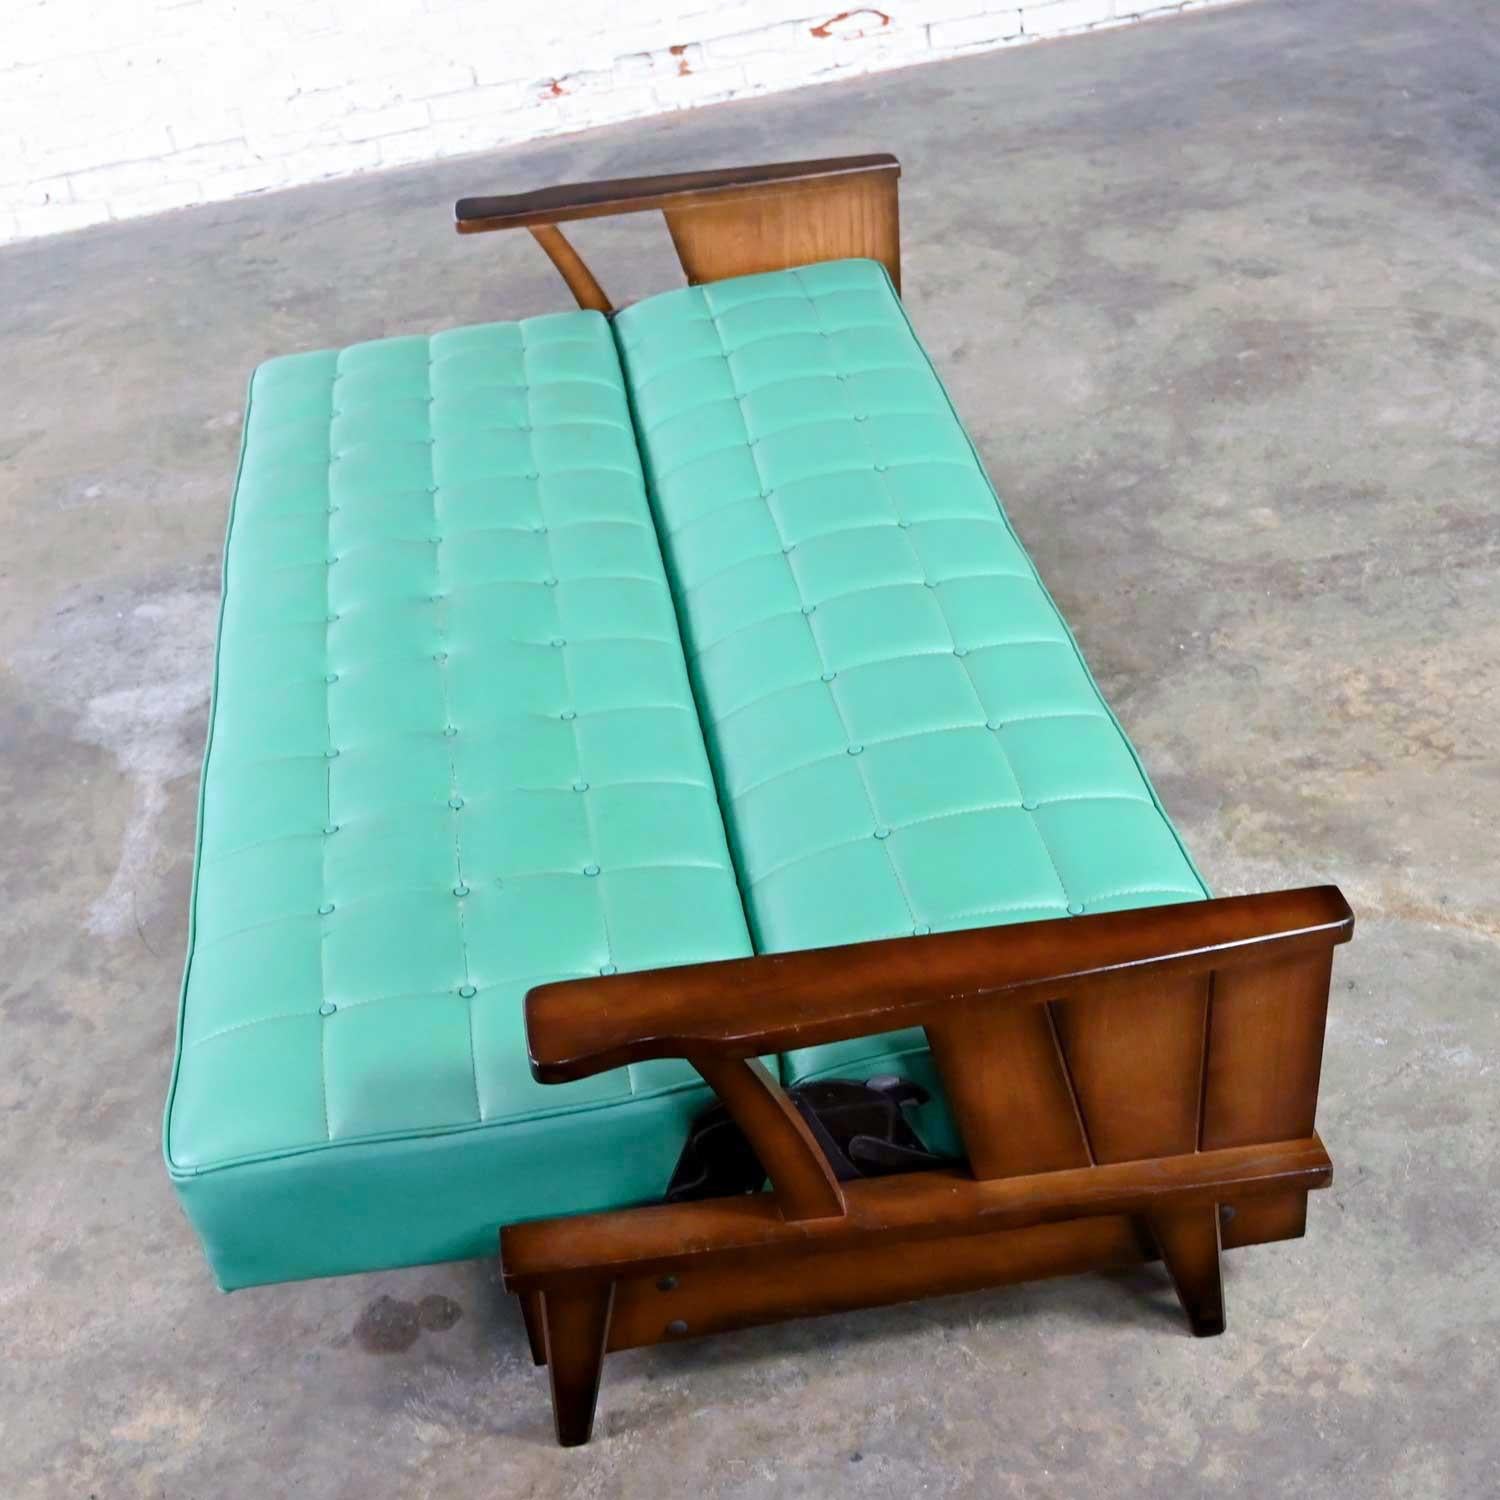 20th Century Brandt Ranch Oak Style Turquoise Vinyl Convertible Sofa Daybed by Economy Furn